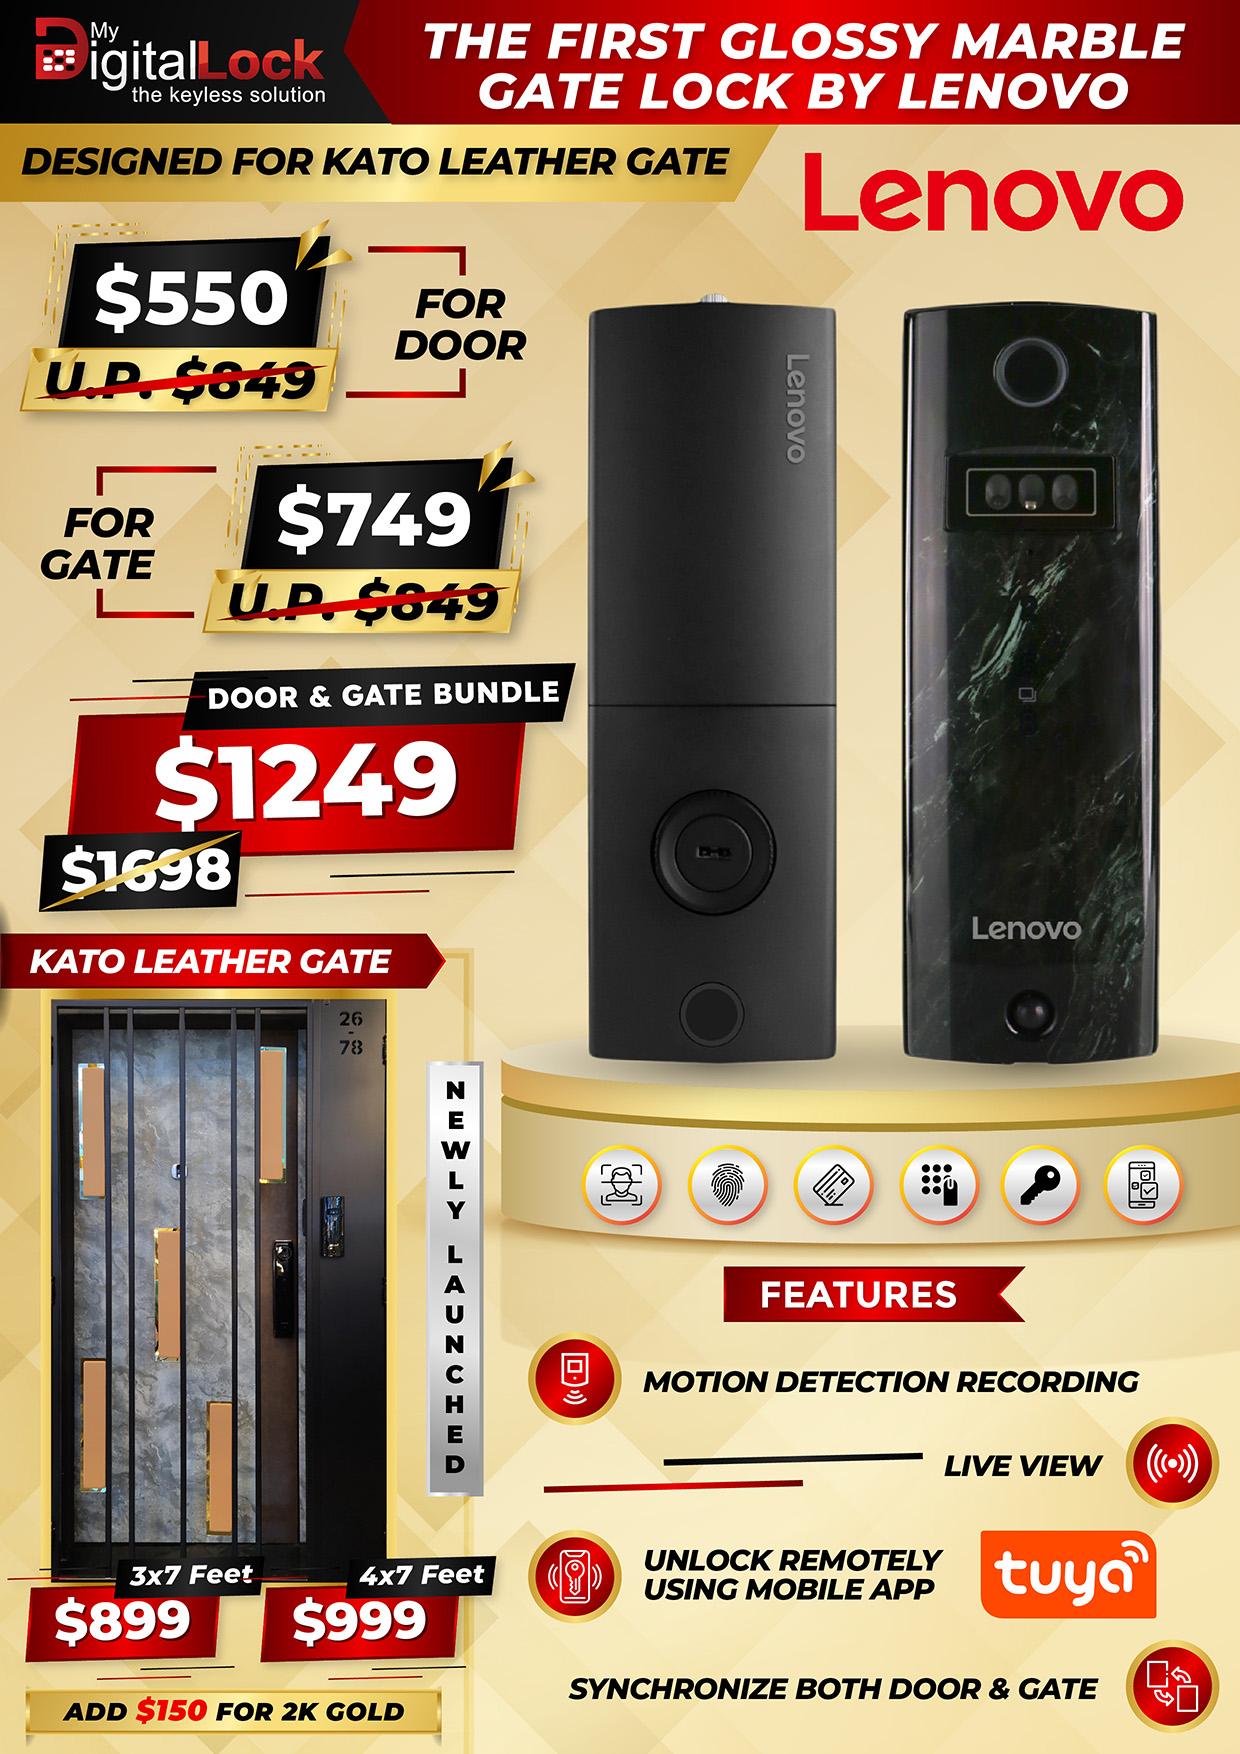 Lenovo-Glossy-Marble-Gate-Promotion